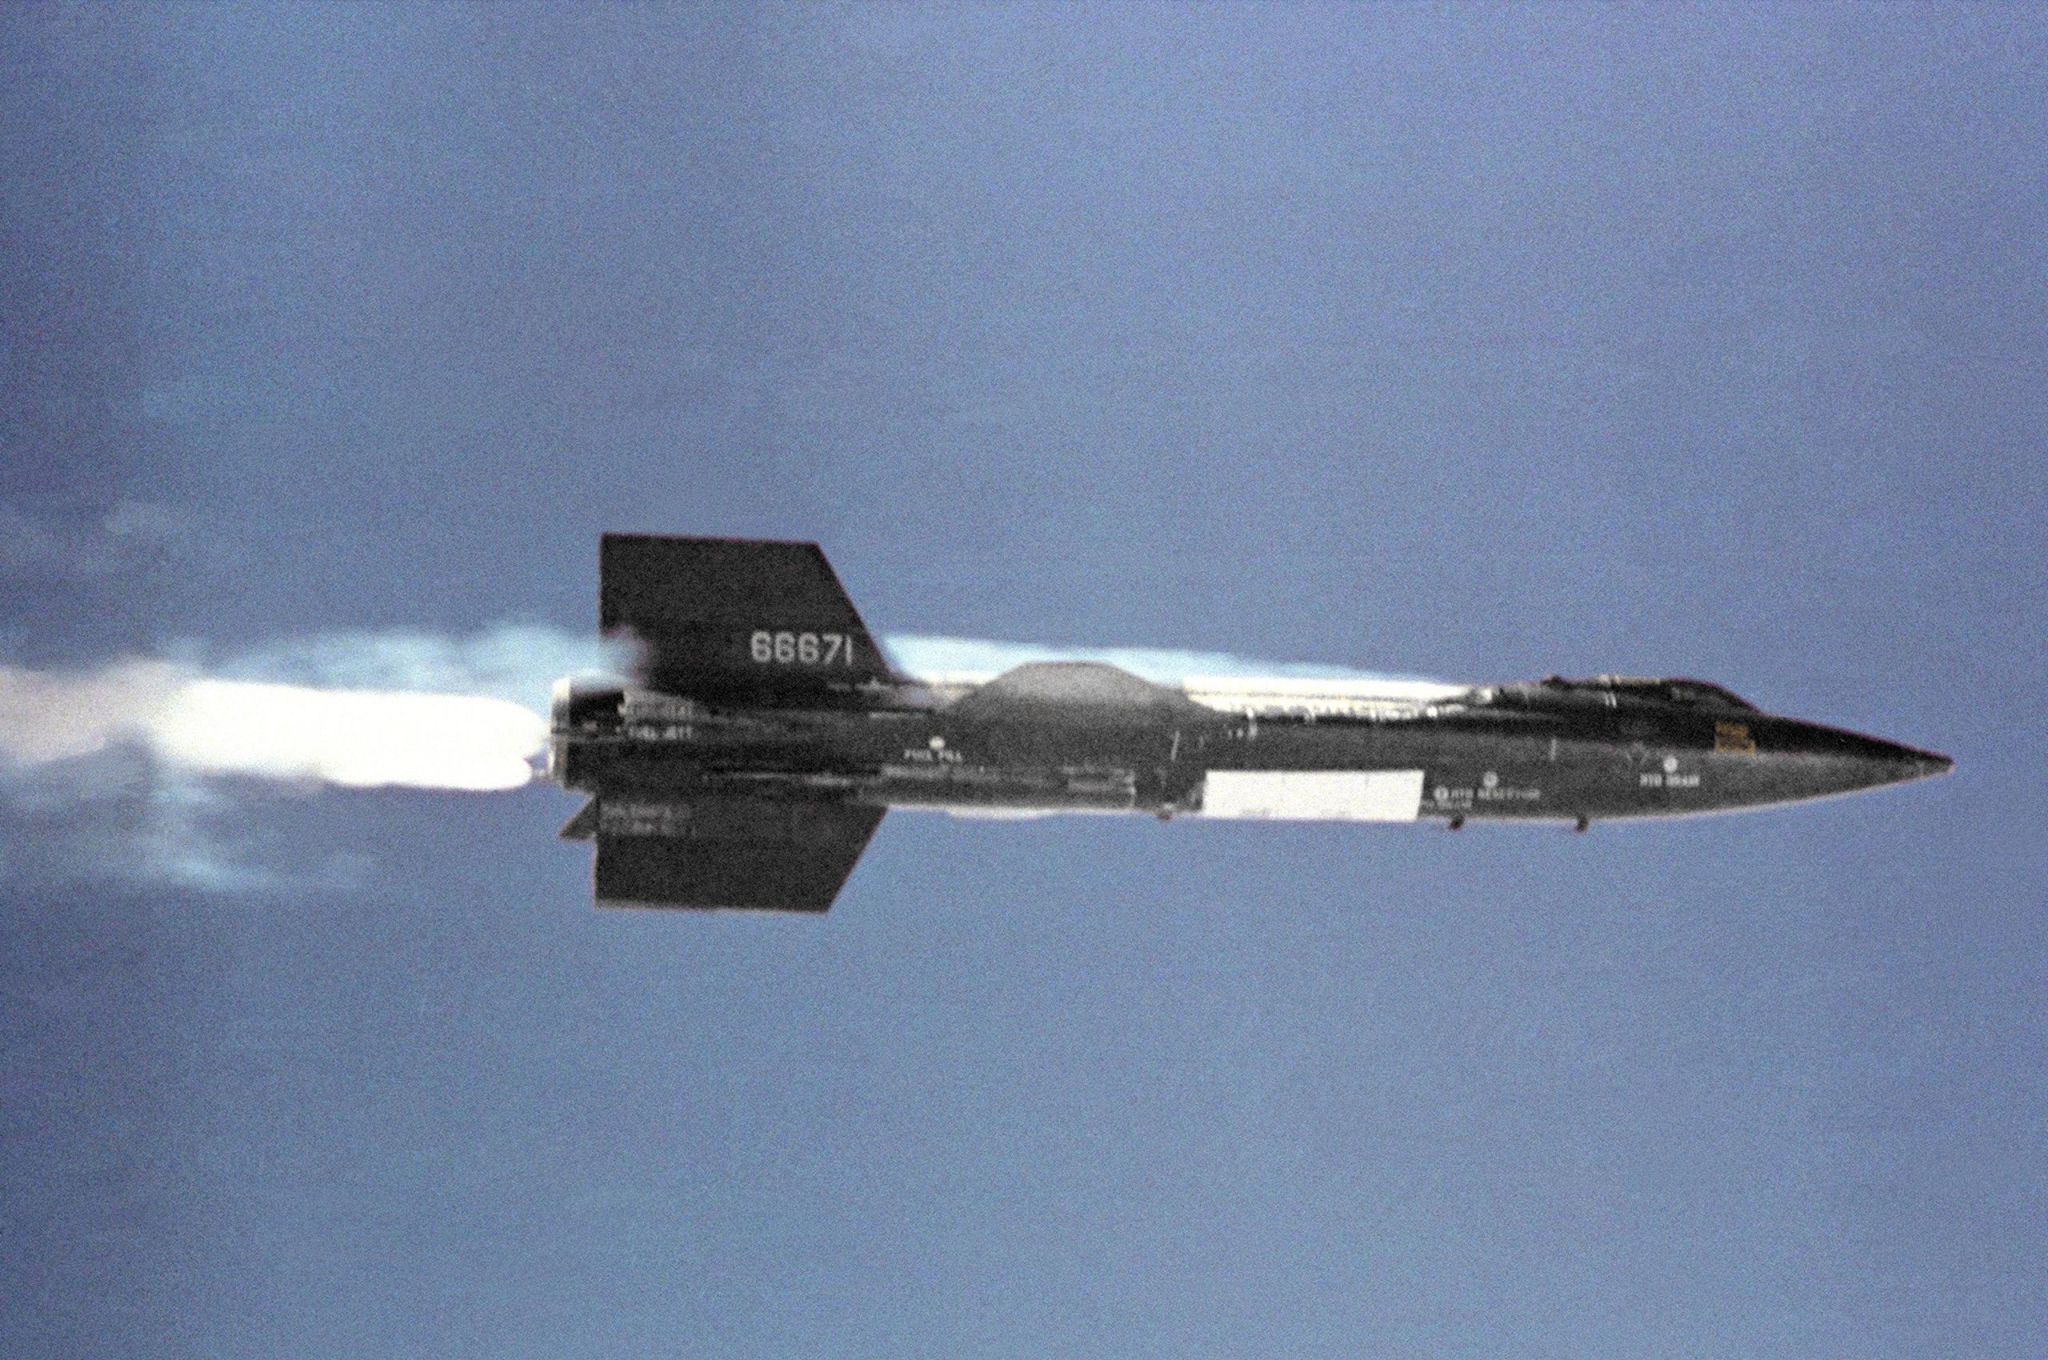 The X-15 launches with its rocket engine ignited